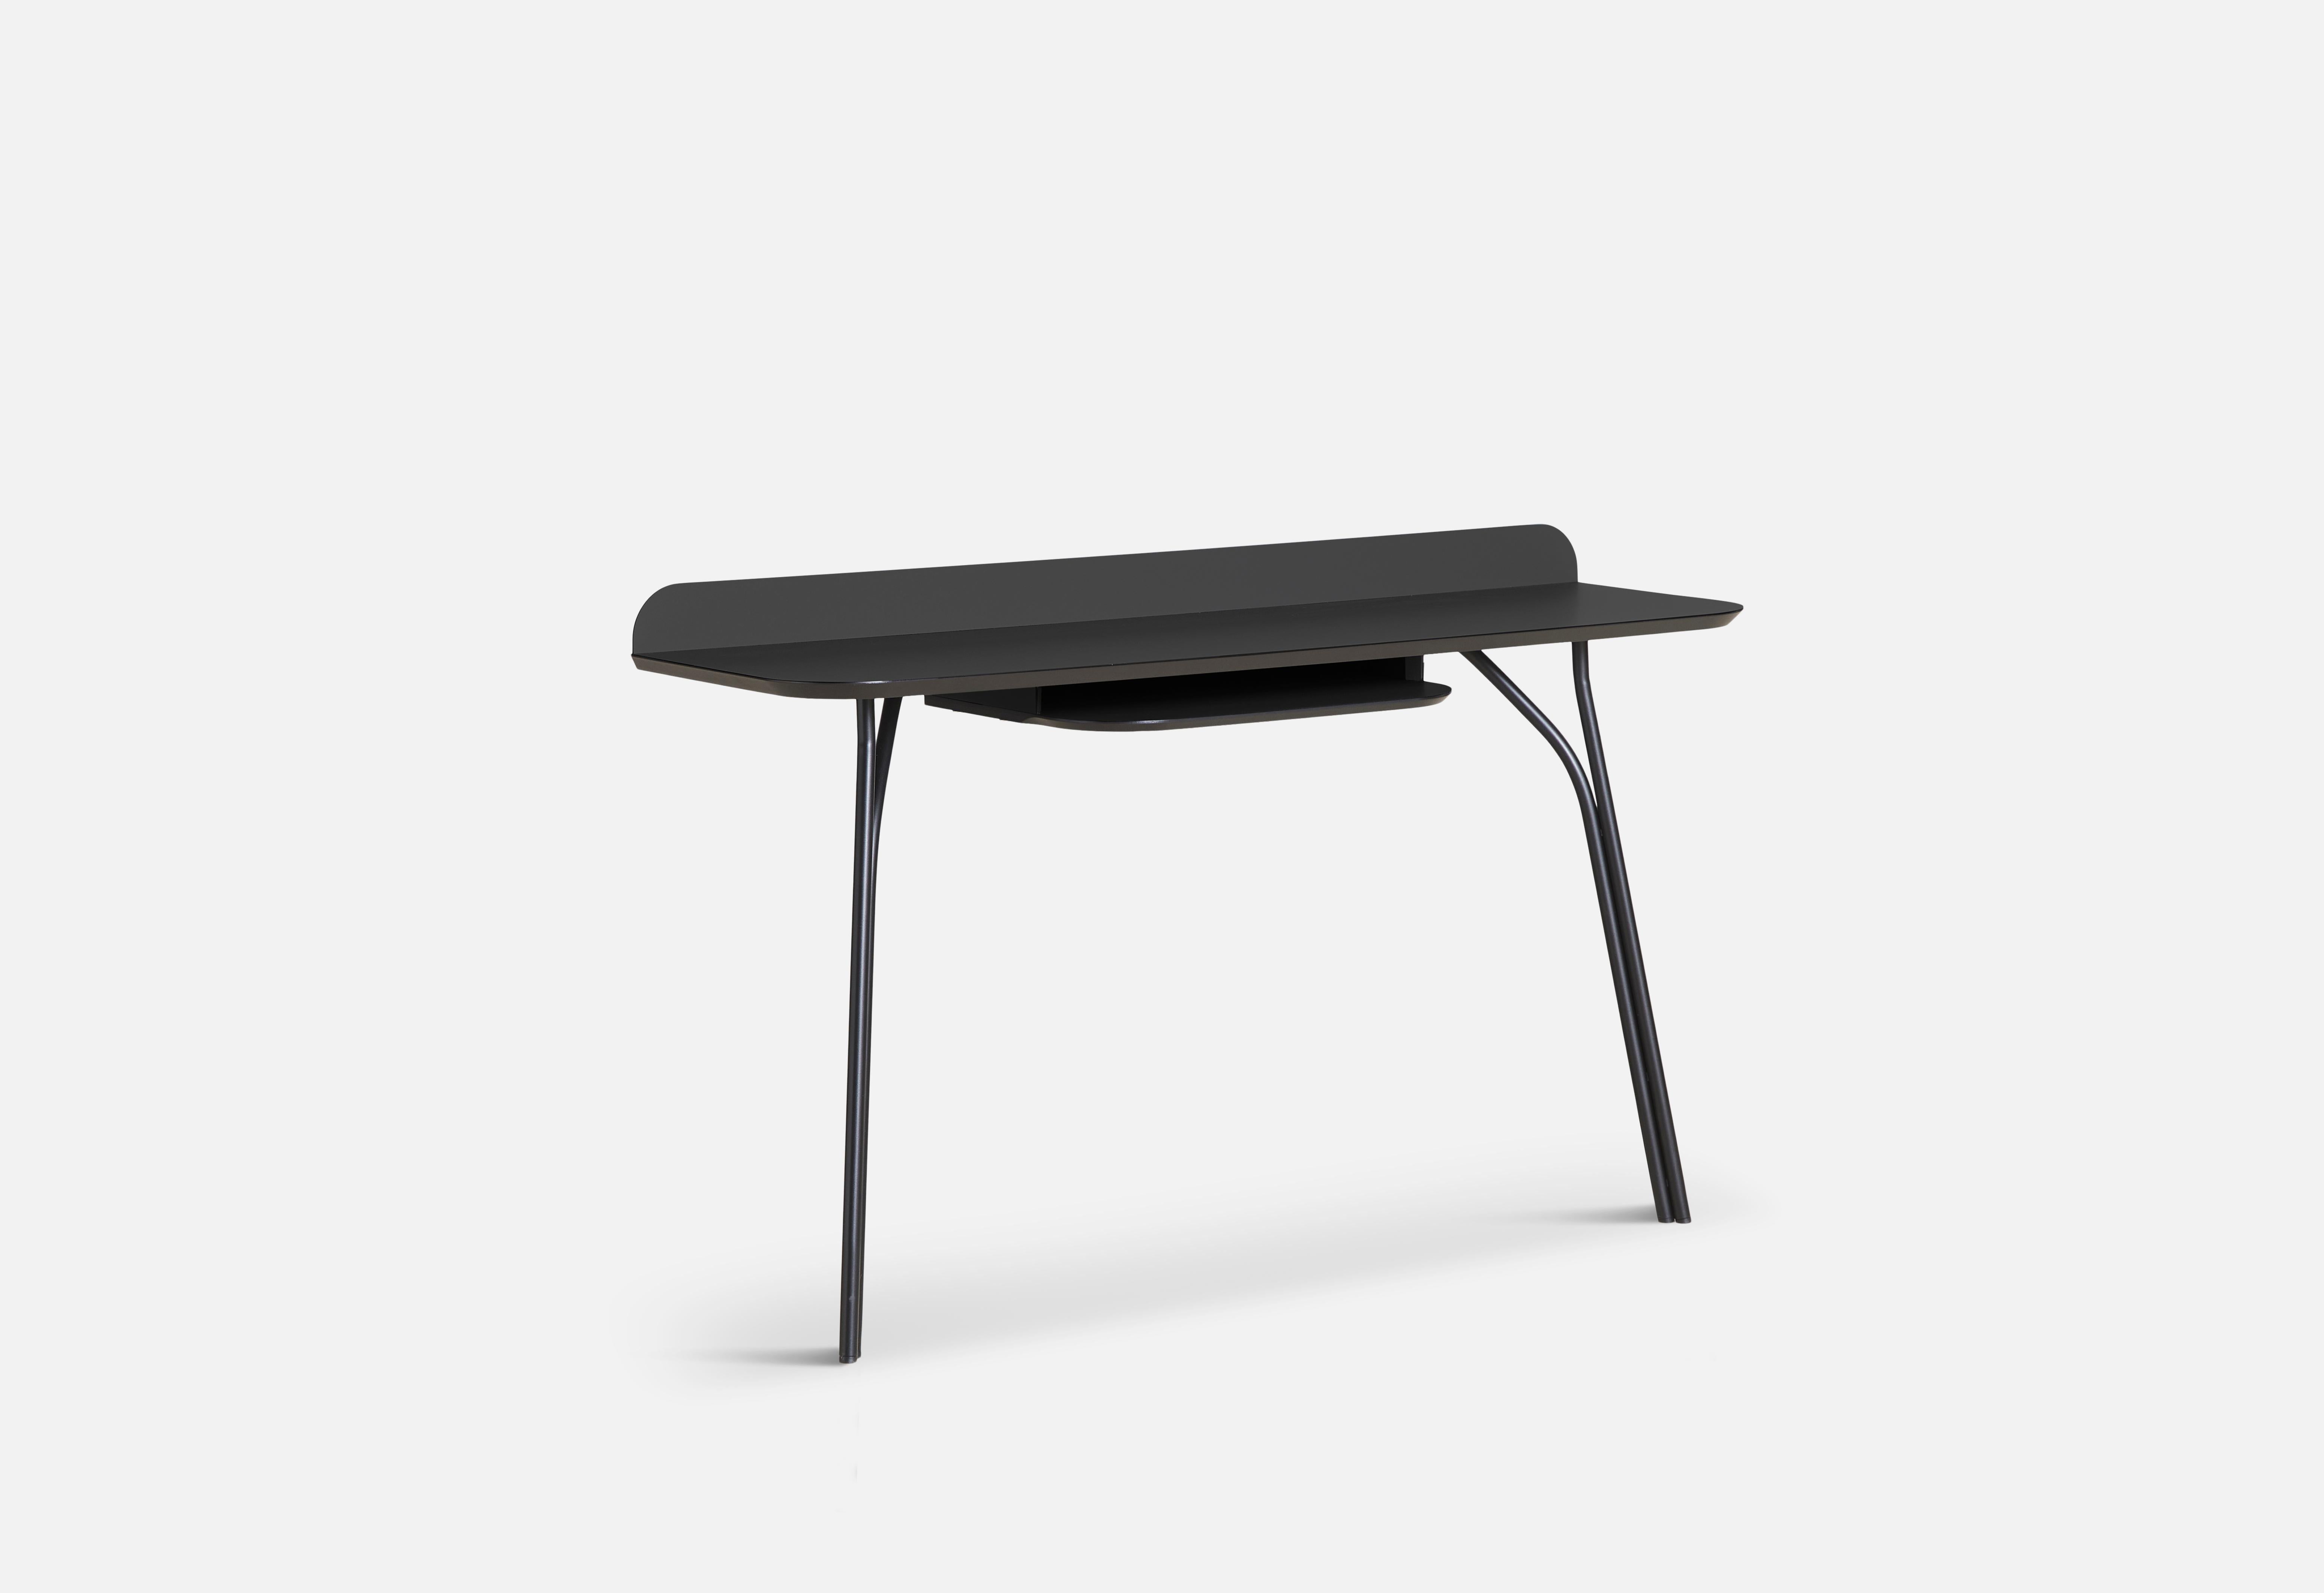 Black tree small console table with shelf by Elisabeth Hertzfeld.
Materials: fenix laminate, metal.
Dimensions: D 40 x W 130 x H 81 cm.

The founders, Mia and Torben Koed, decided to put their 30 years of experience into a new project. It was